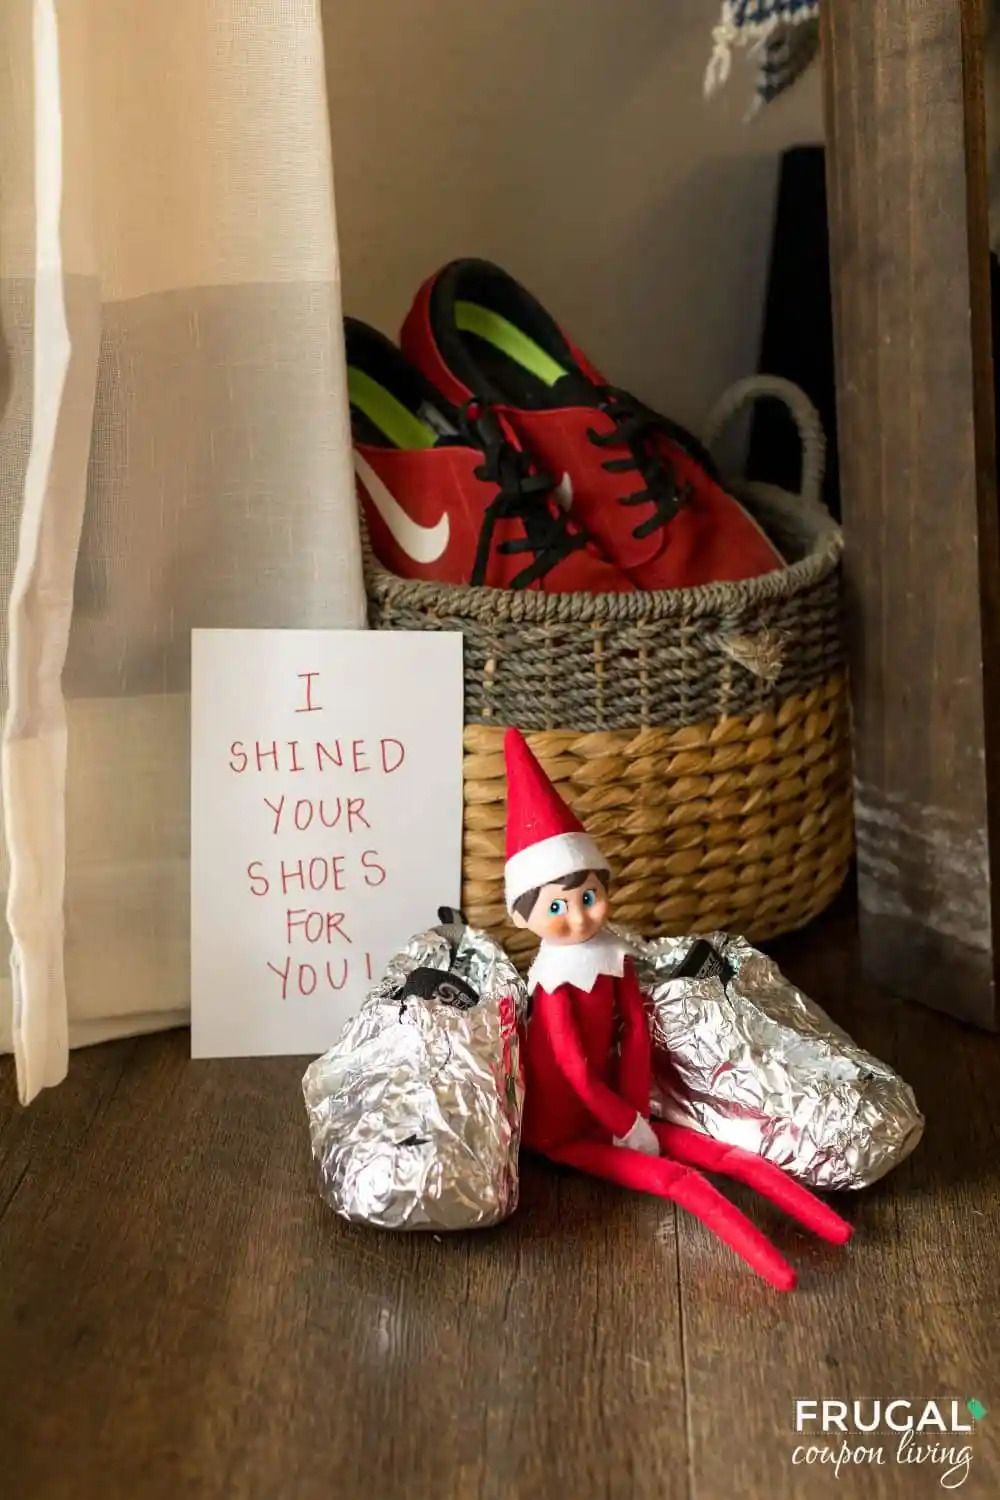 When Does Elf On The Shelf Start and End in 2023?